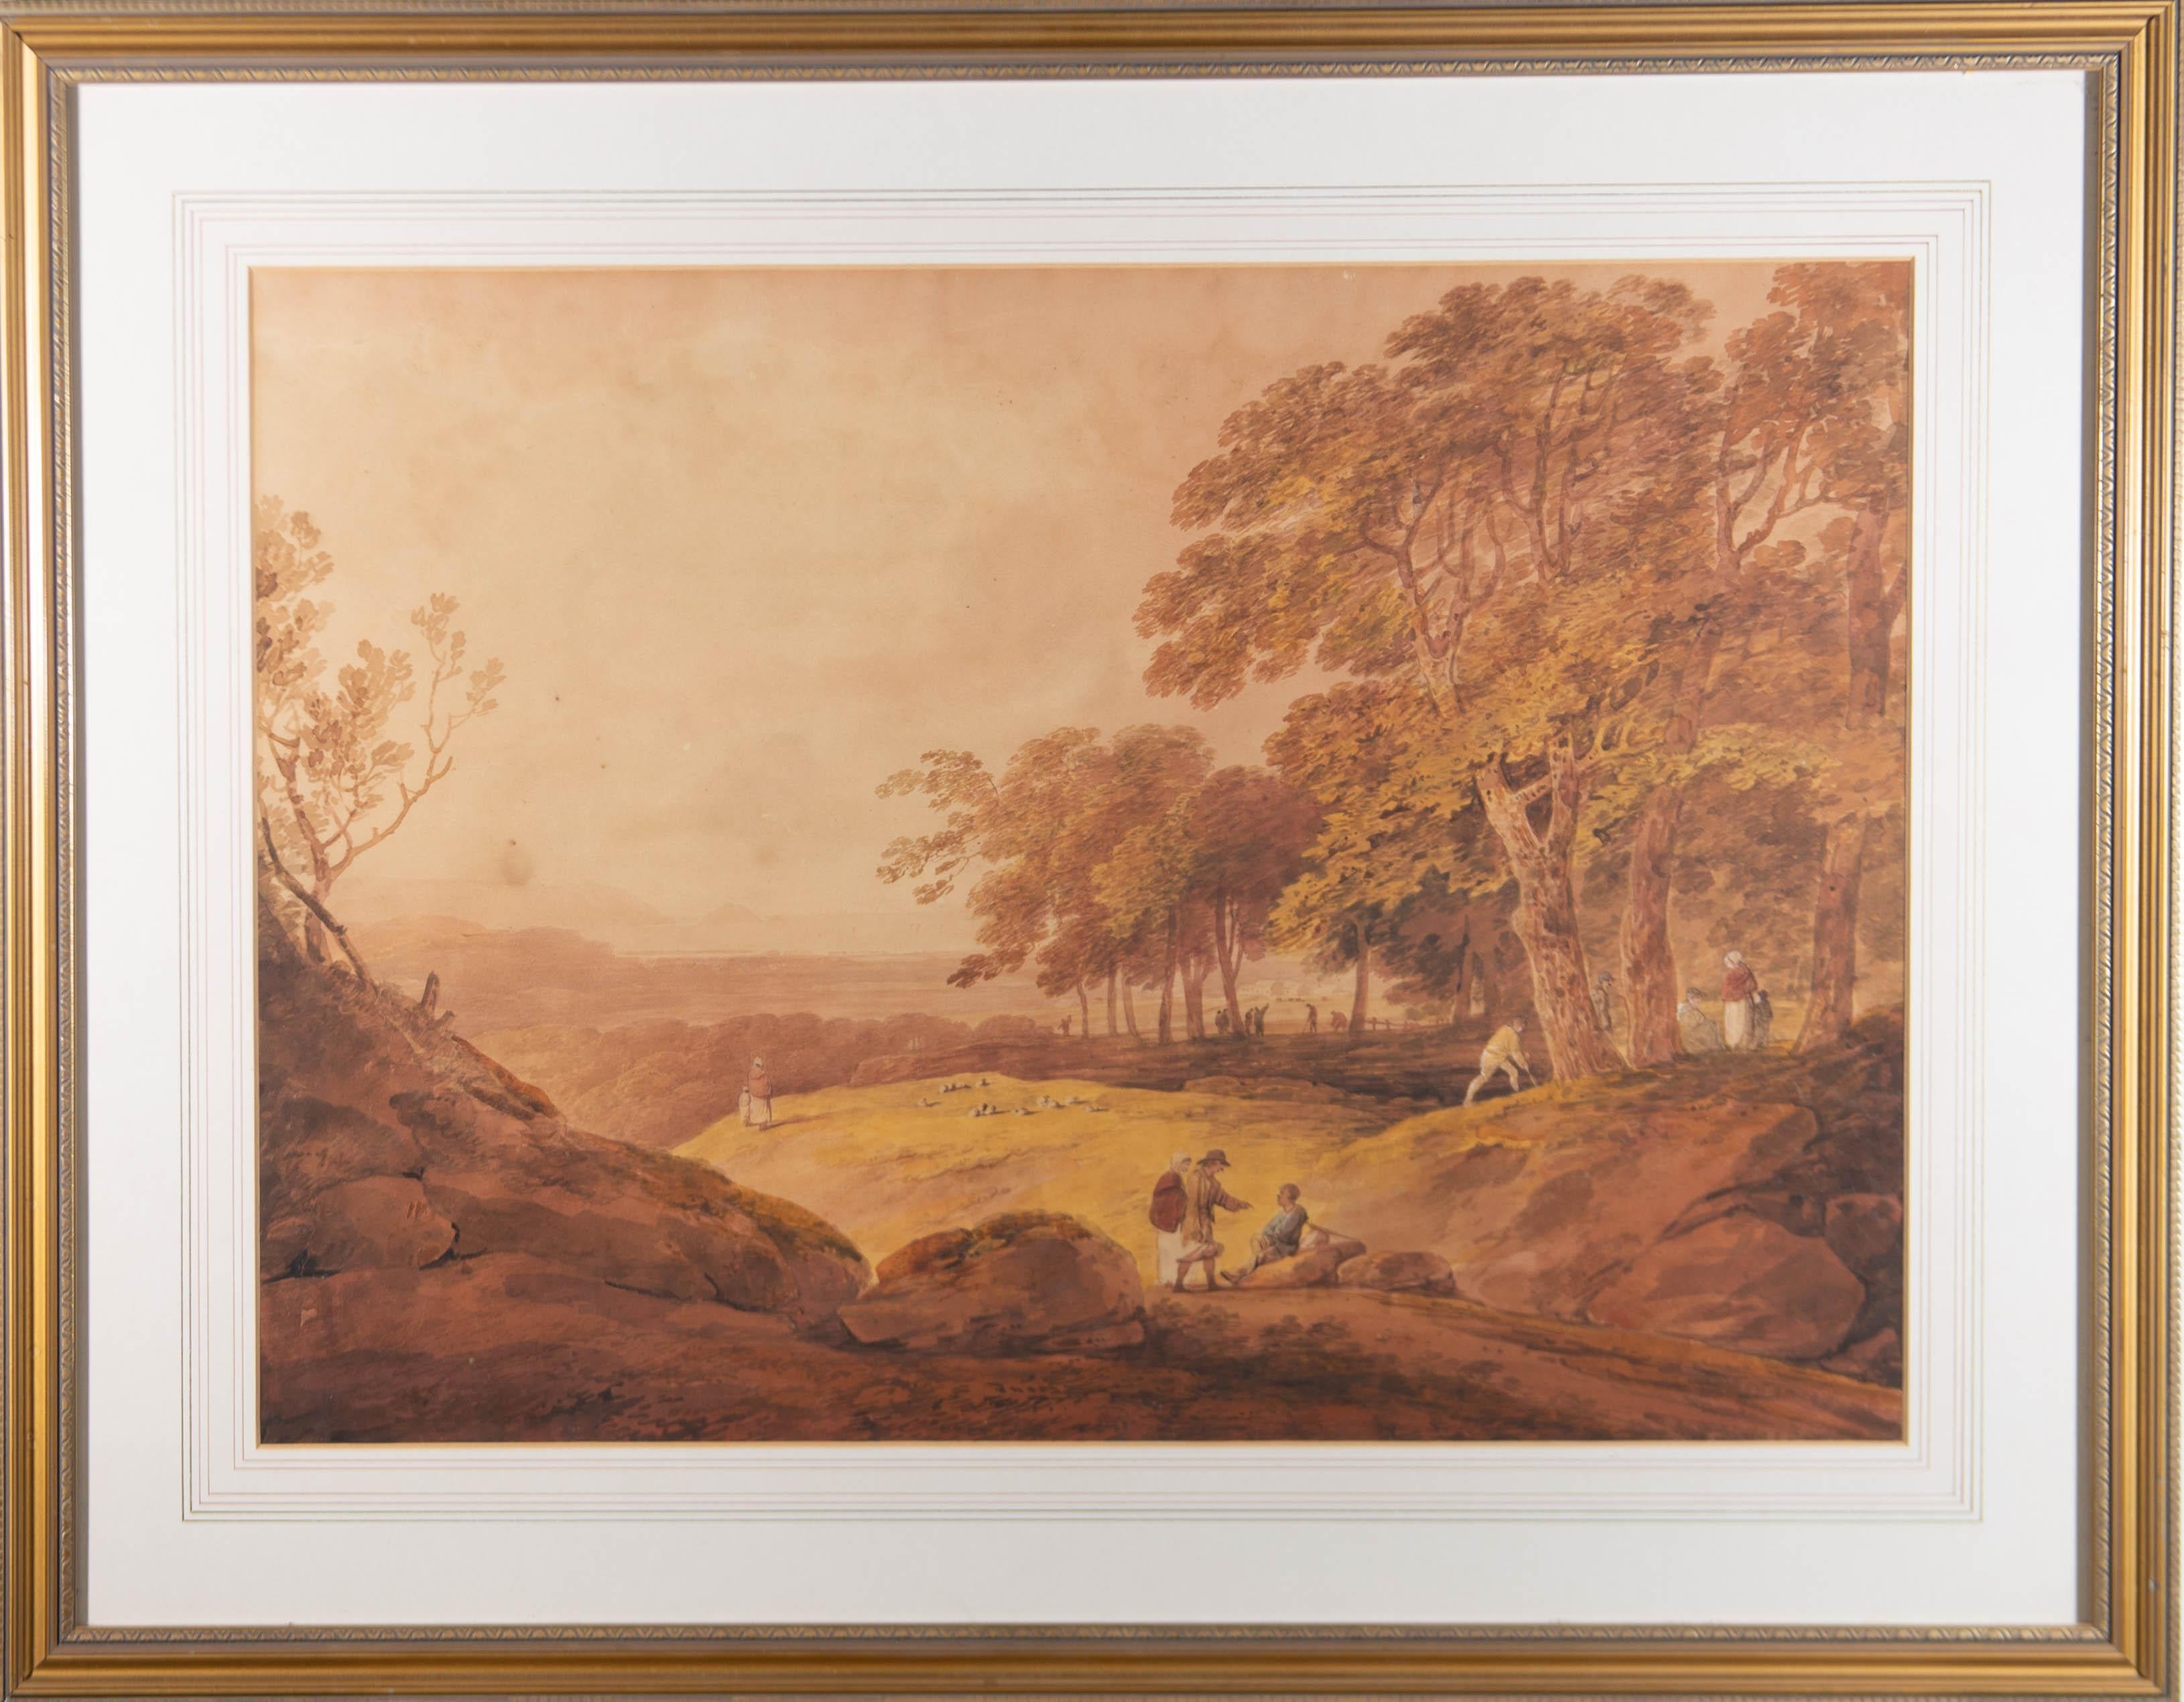 Unknown Landscape Art - Fine Early 19th Century Watercolour - Panoramic Landscape with Figures